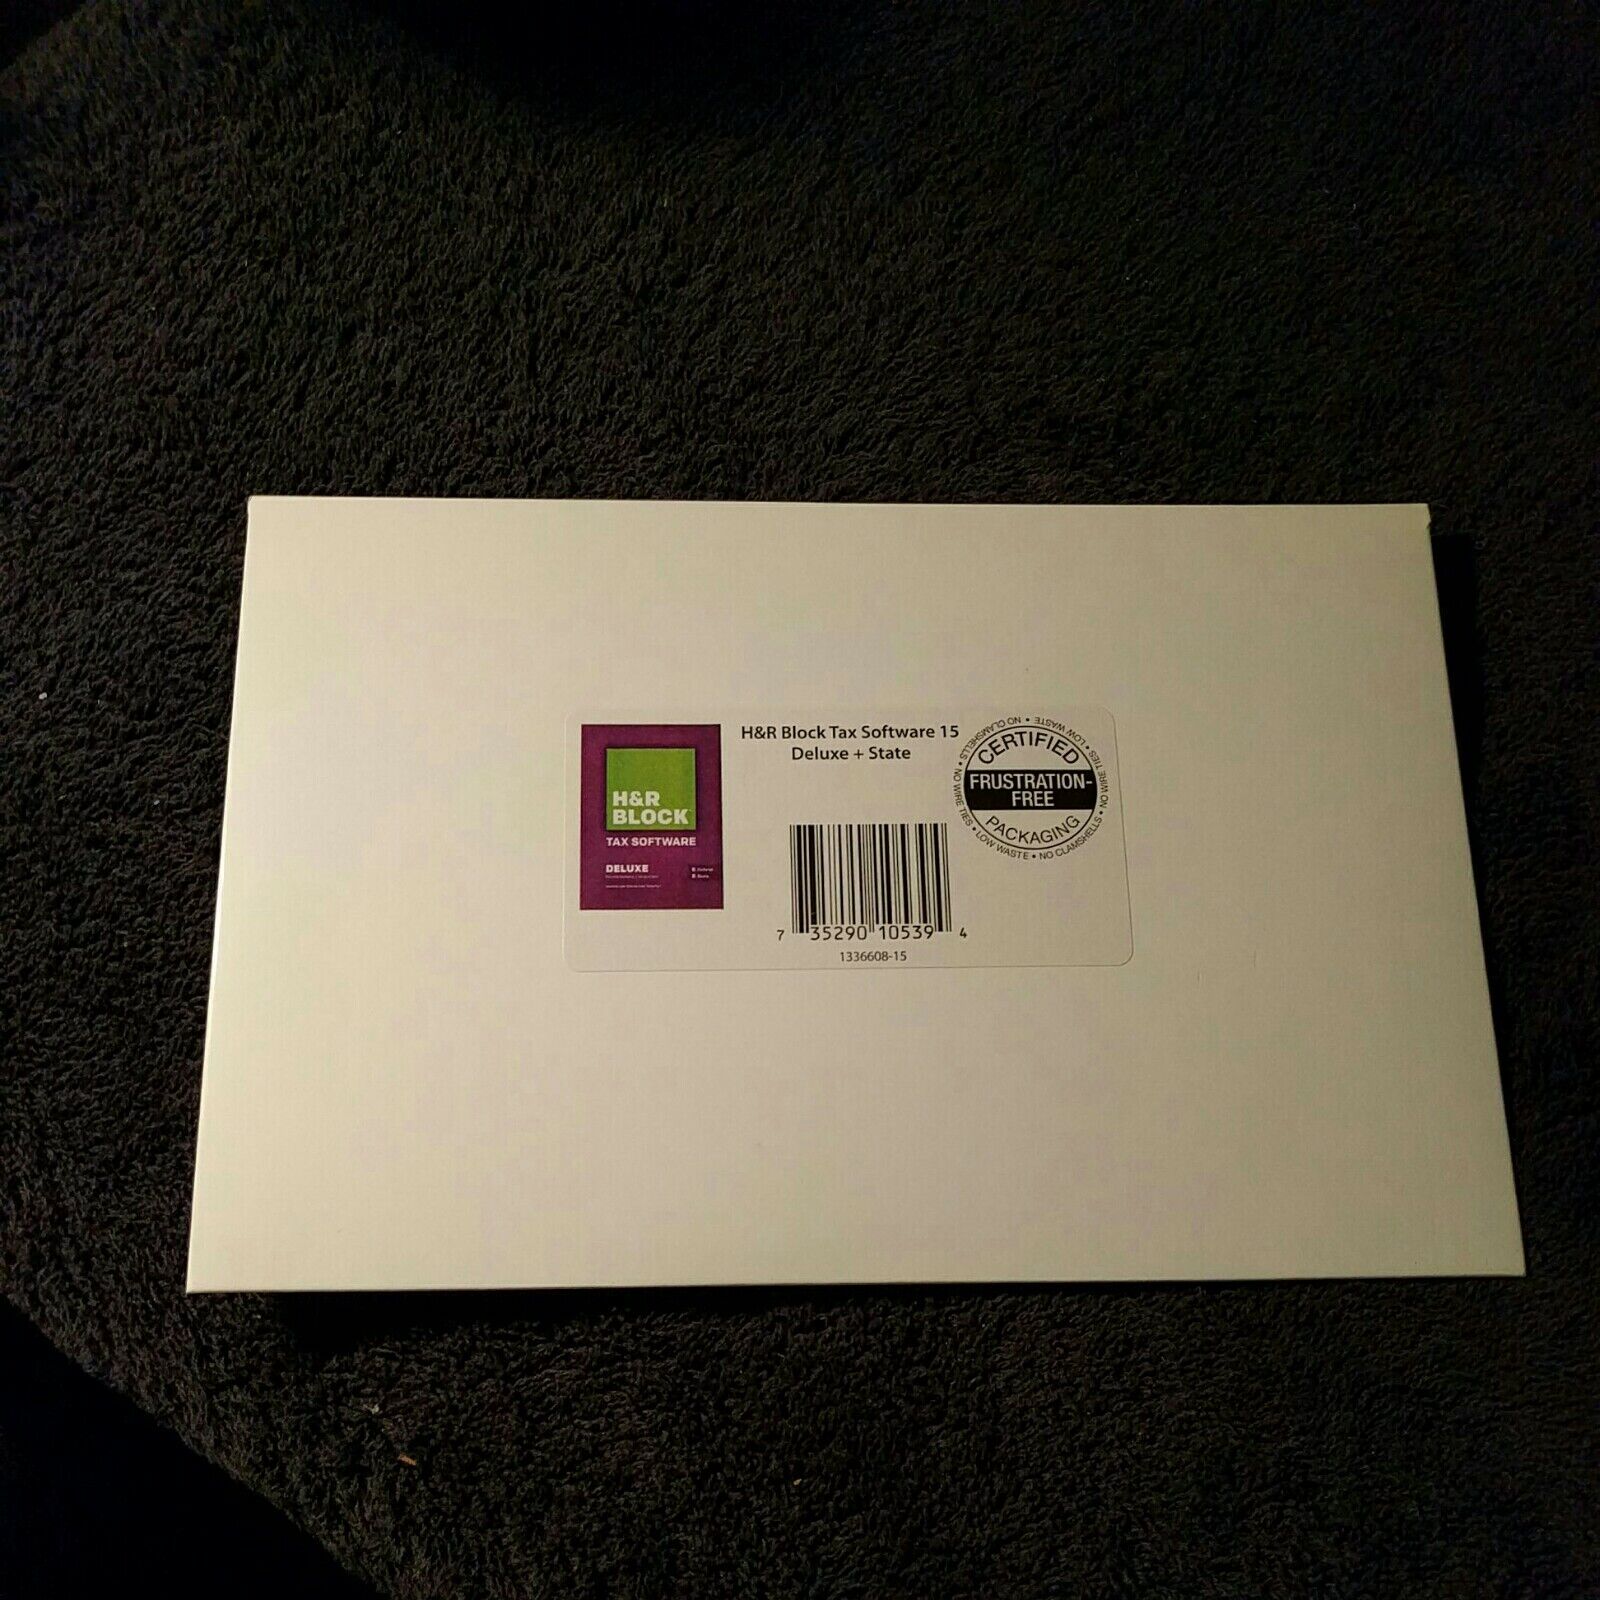 h&r block key code for previous years